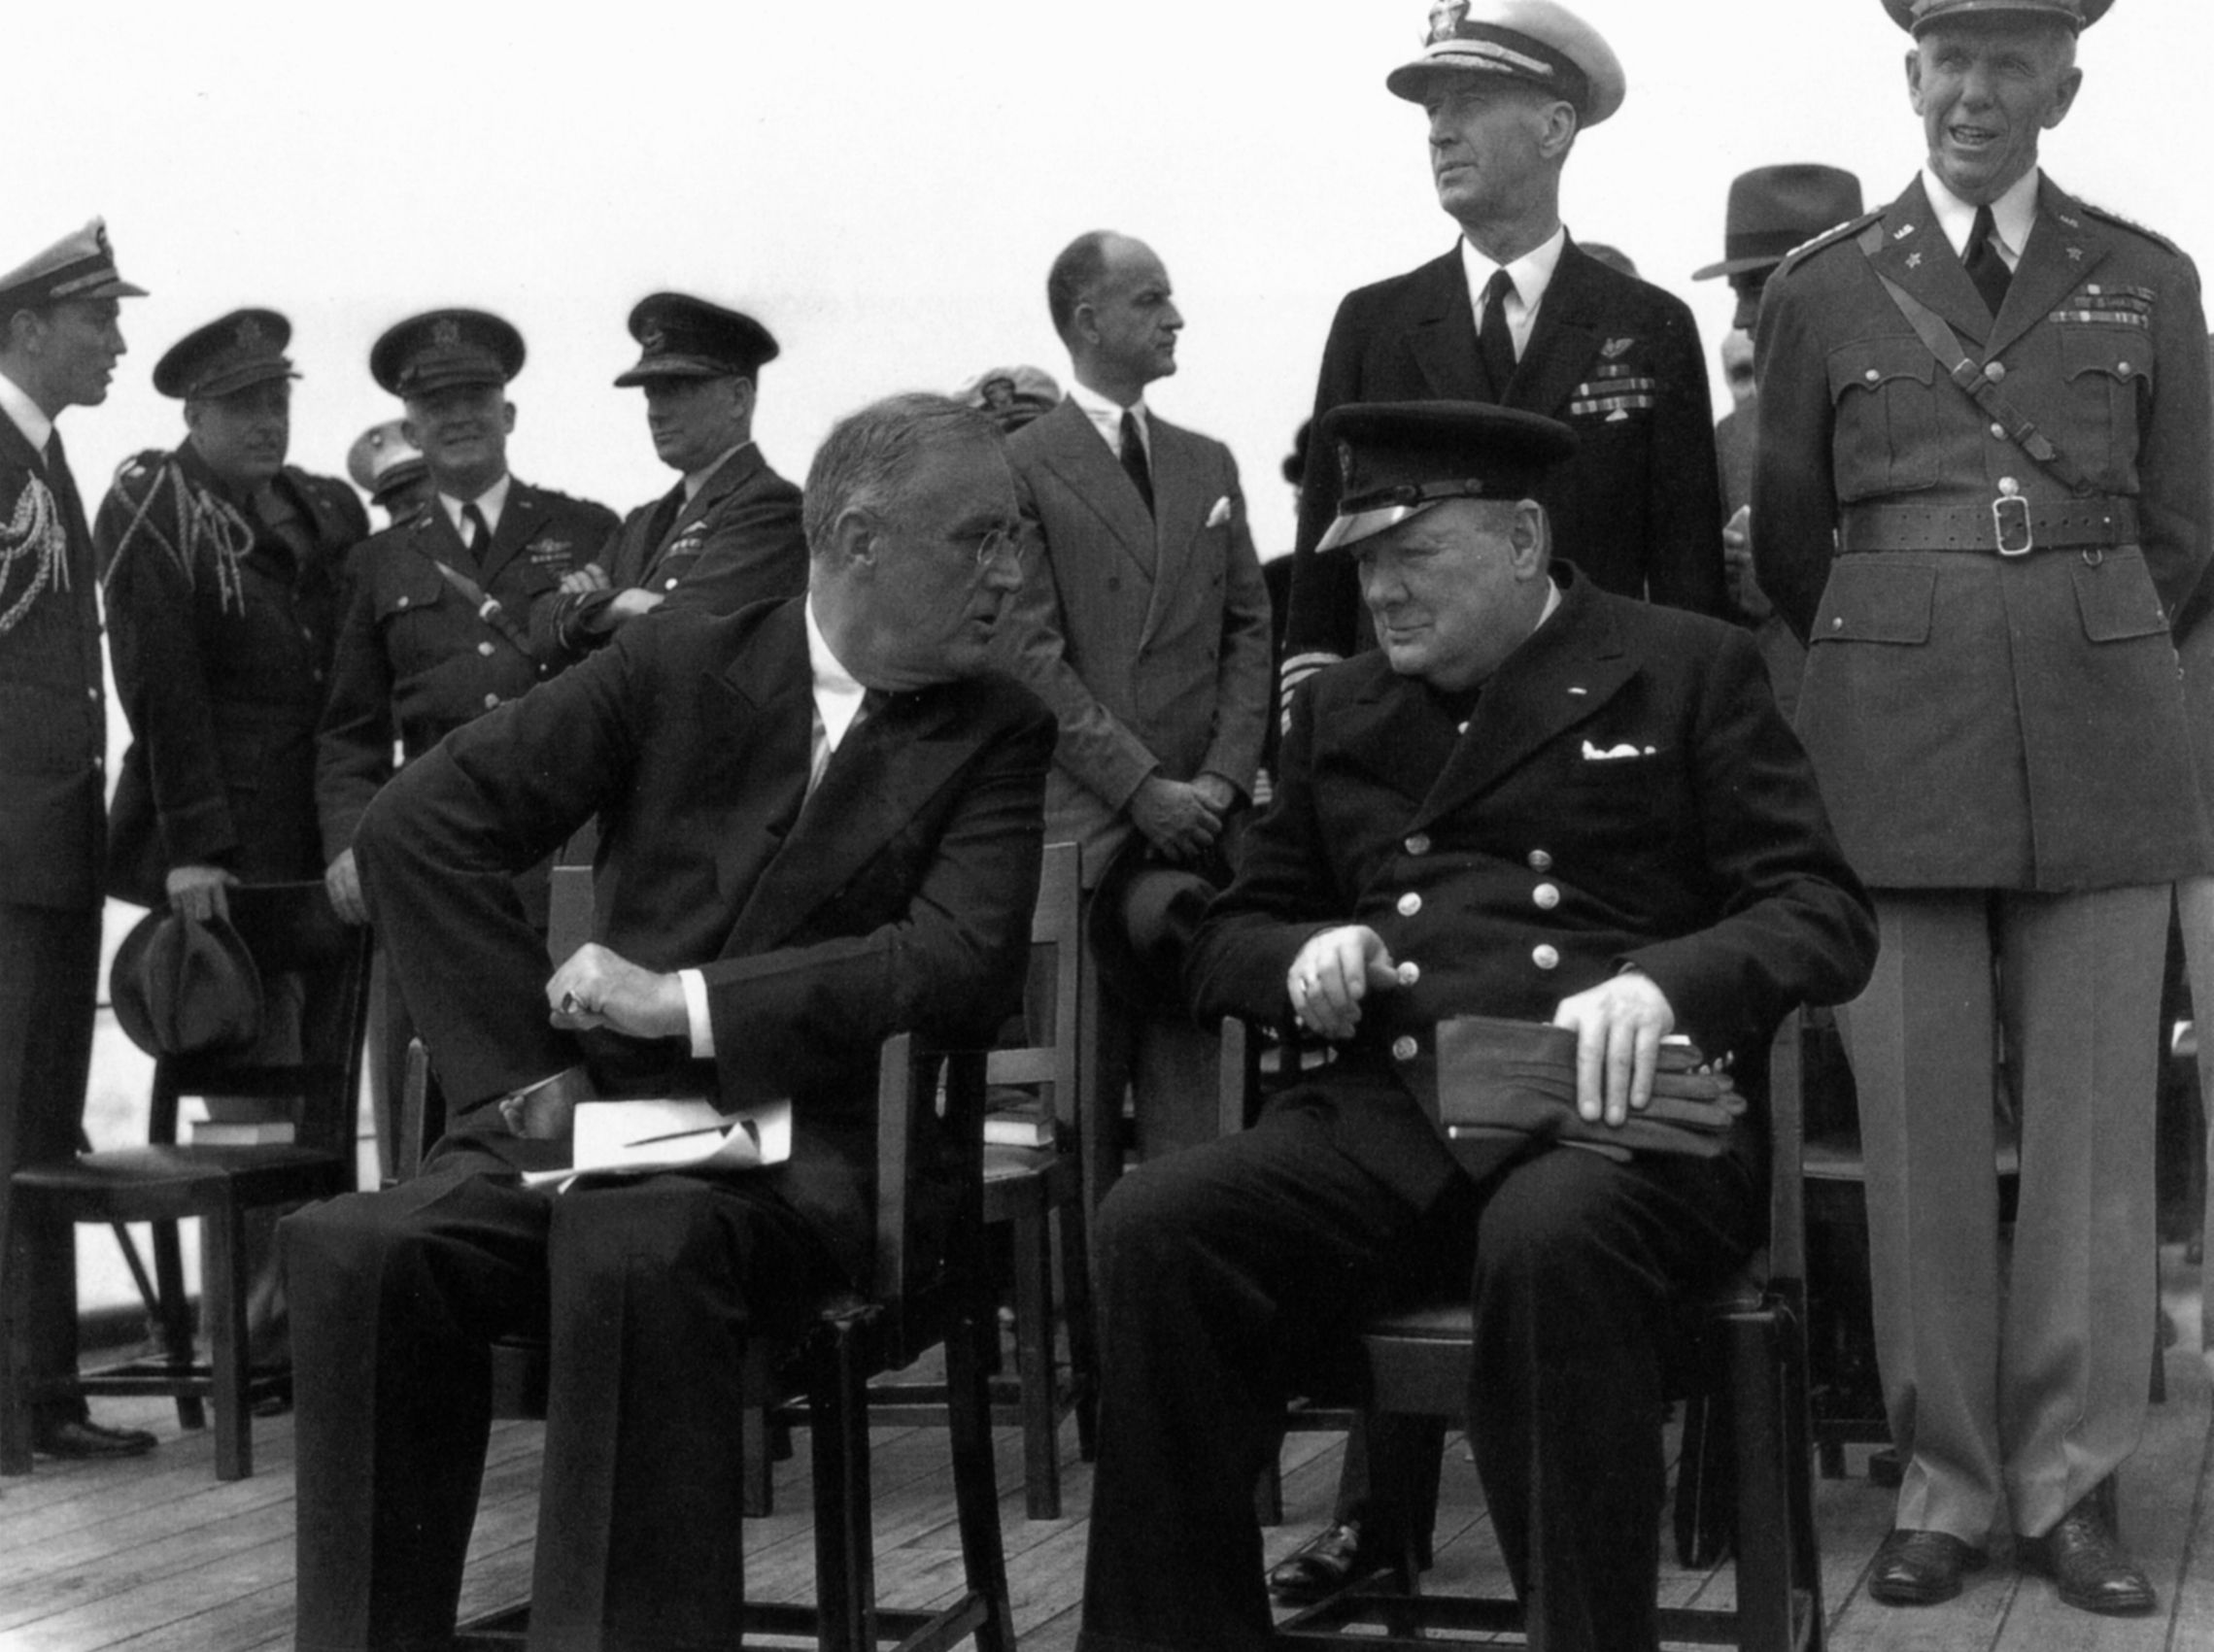 Roosevelt confers with British Prime Minister Winston Churchill during their historic meeting at Placentia Bay, Newfoundland, in August 1941. The leaders drafted the Atlantic Charter during their conference. (National Archives)